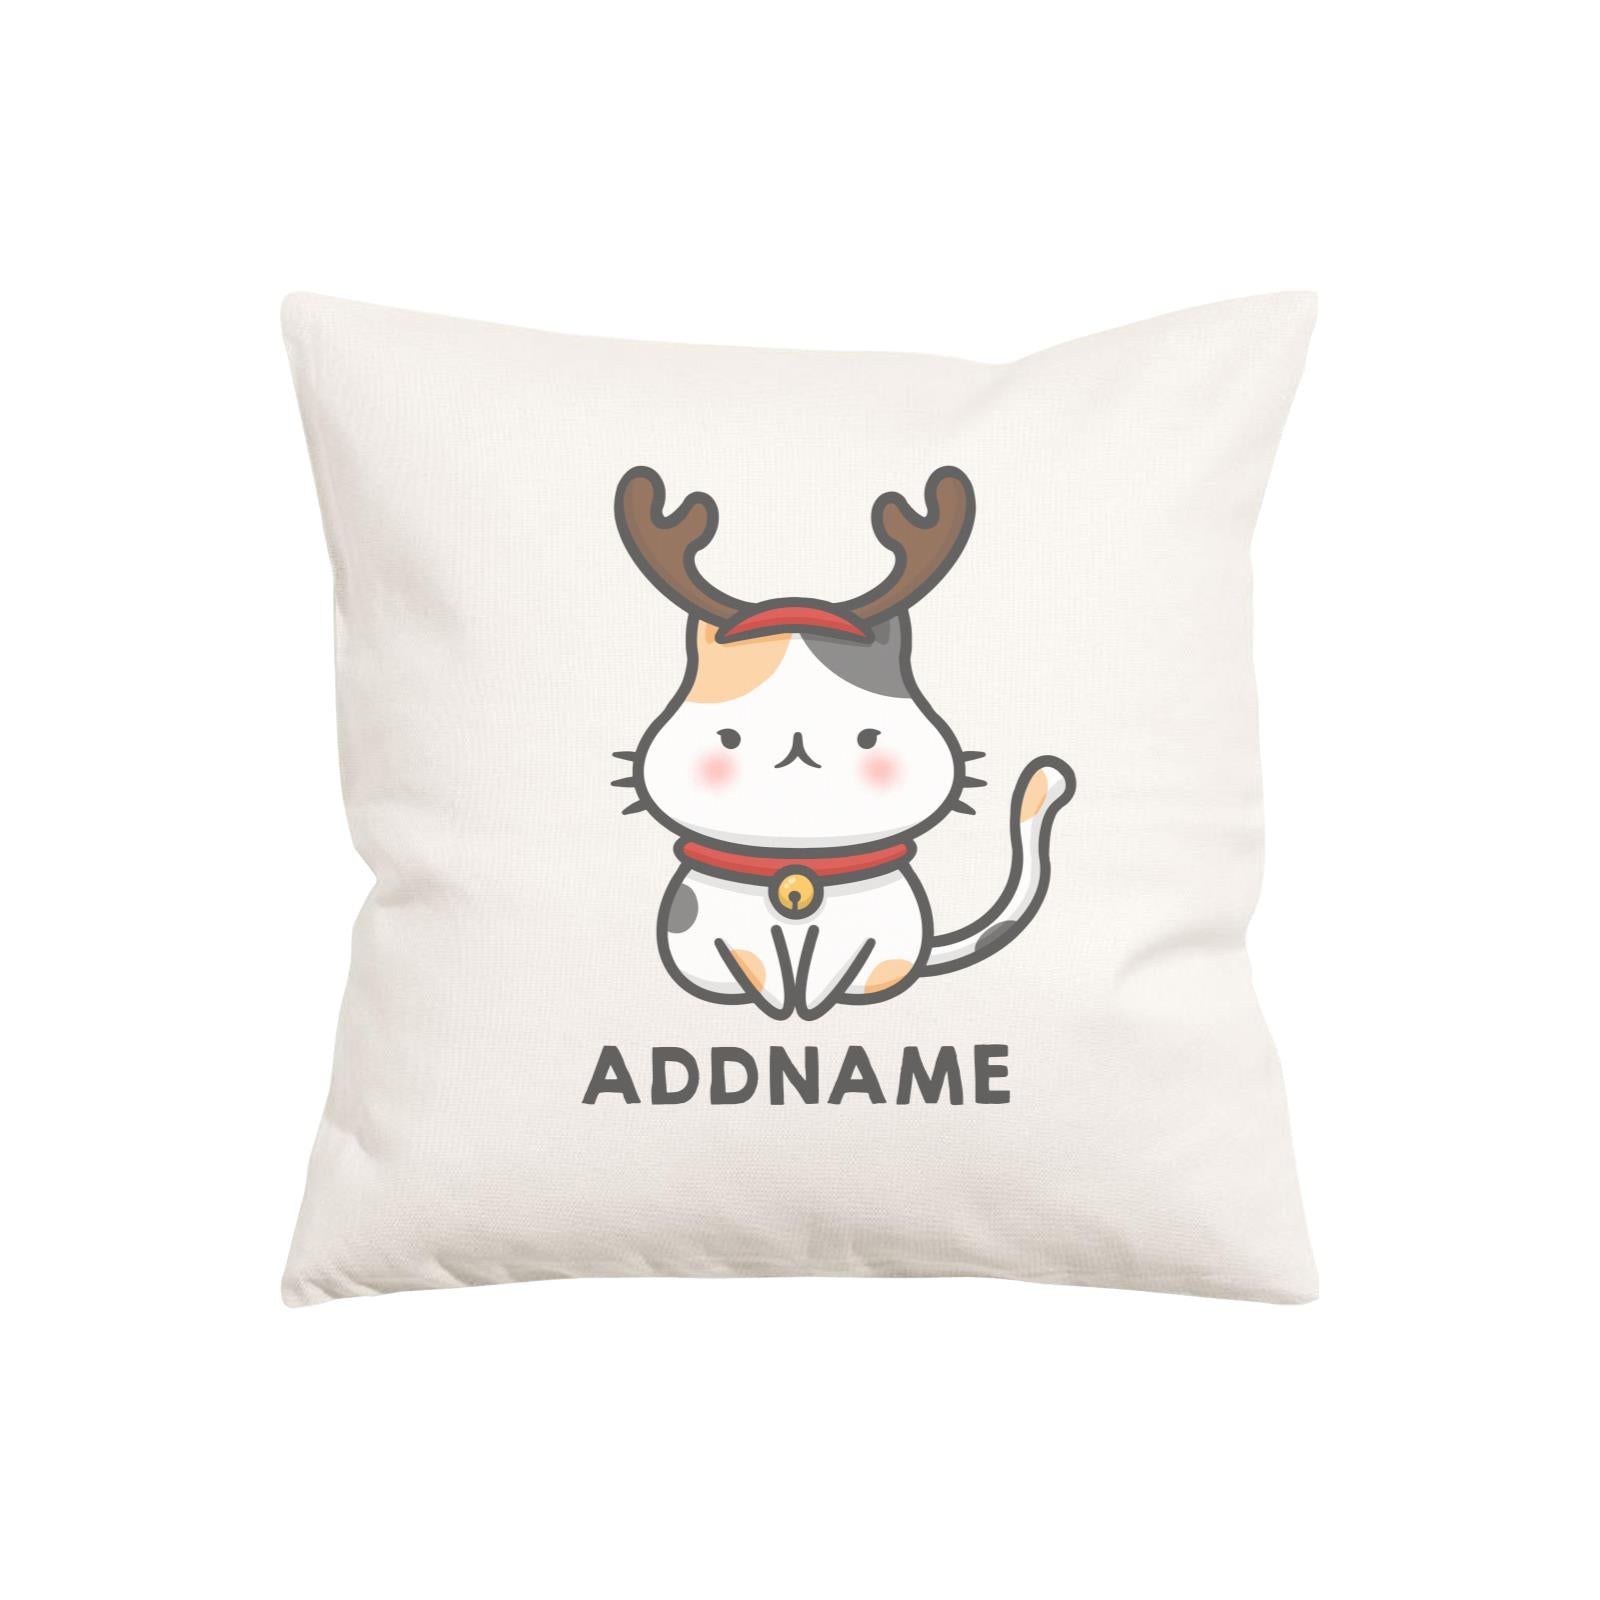 Xmas Cute Cat With Reindeer Antlers Addname Pillow Cushion